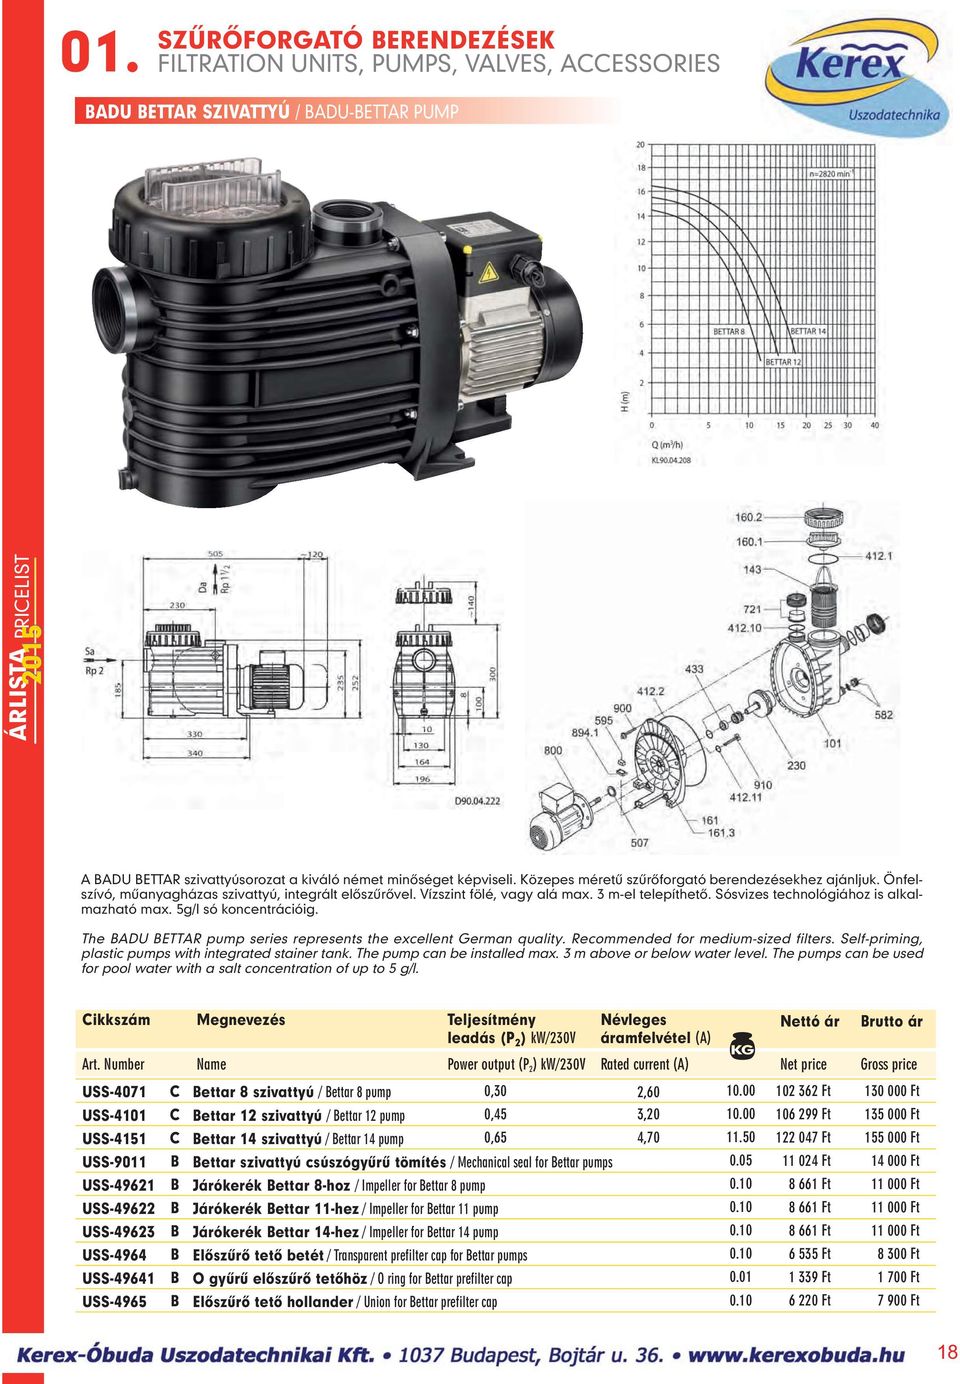 The BADU BETTAR pump series represents the excellent German quality. Recommended for medium-sized filters. Self-priming, plastic pumps with integrated stainer tank. The pump can be installed max.